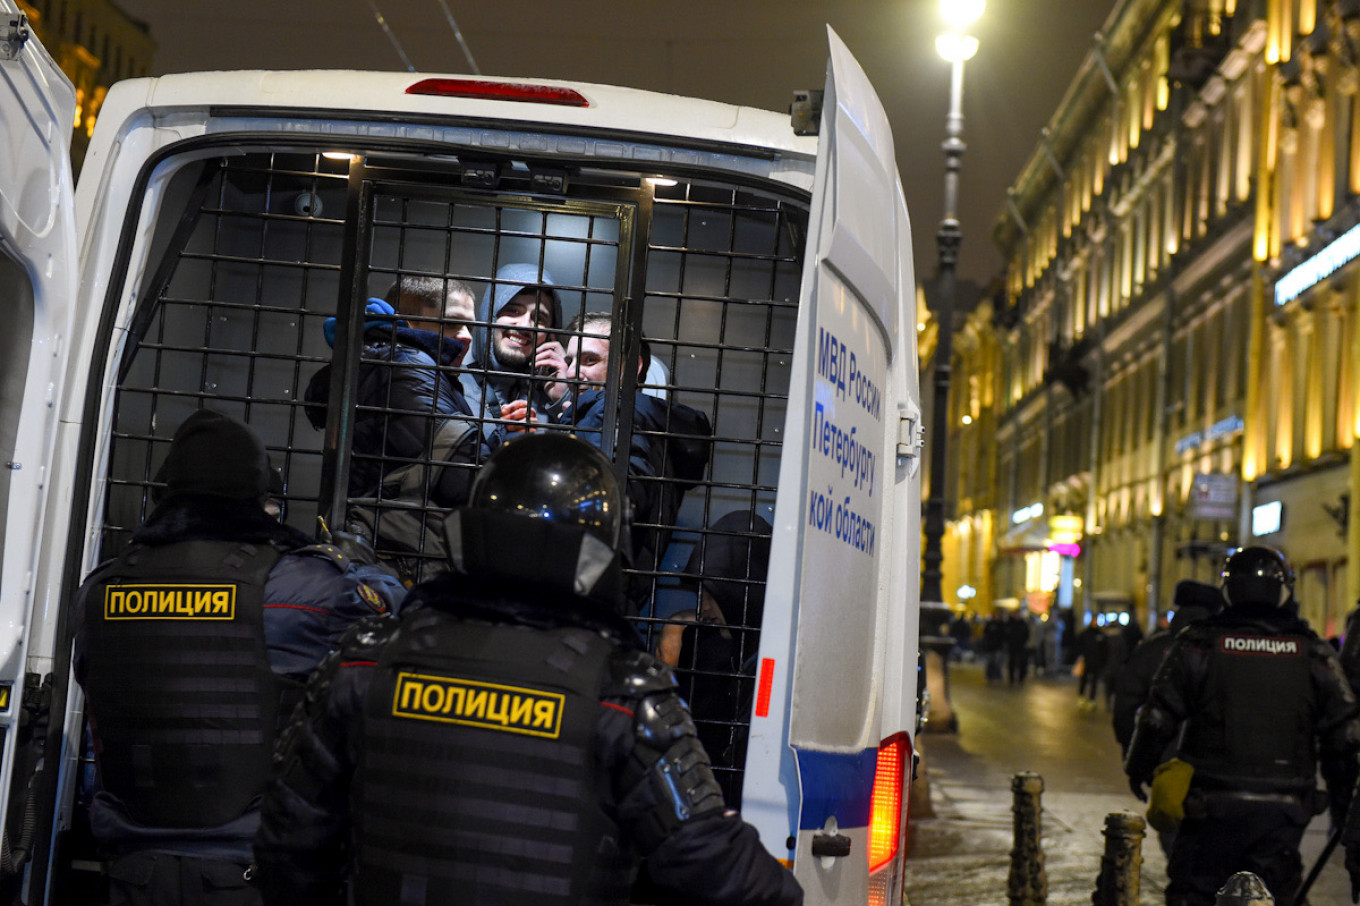 Riot Squads on Red Square and Full Detention Centers: Moscow After Navalny Verdict